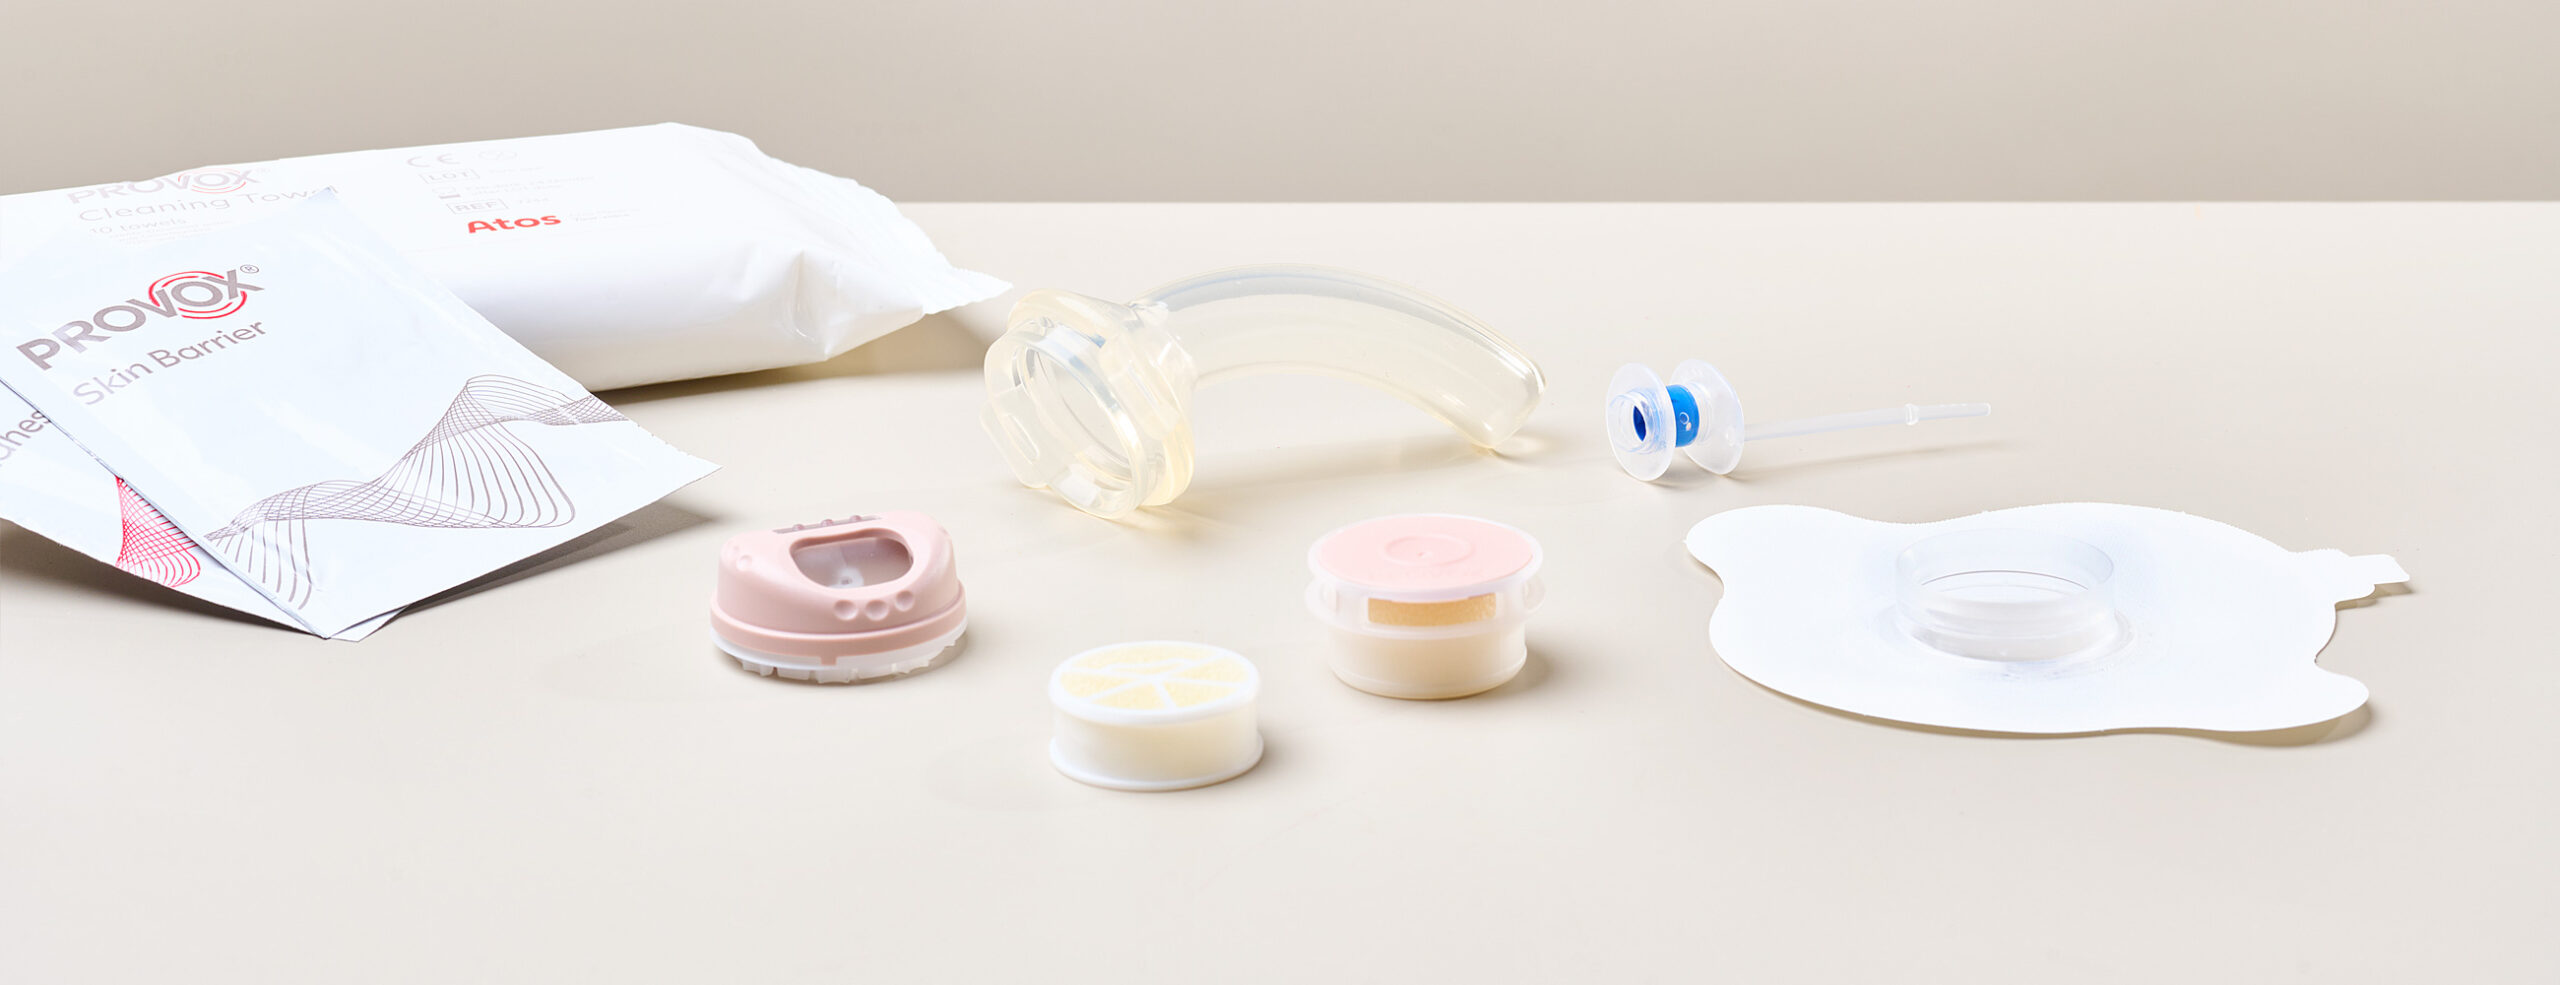 Stock image of tracheostomy products.